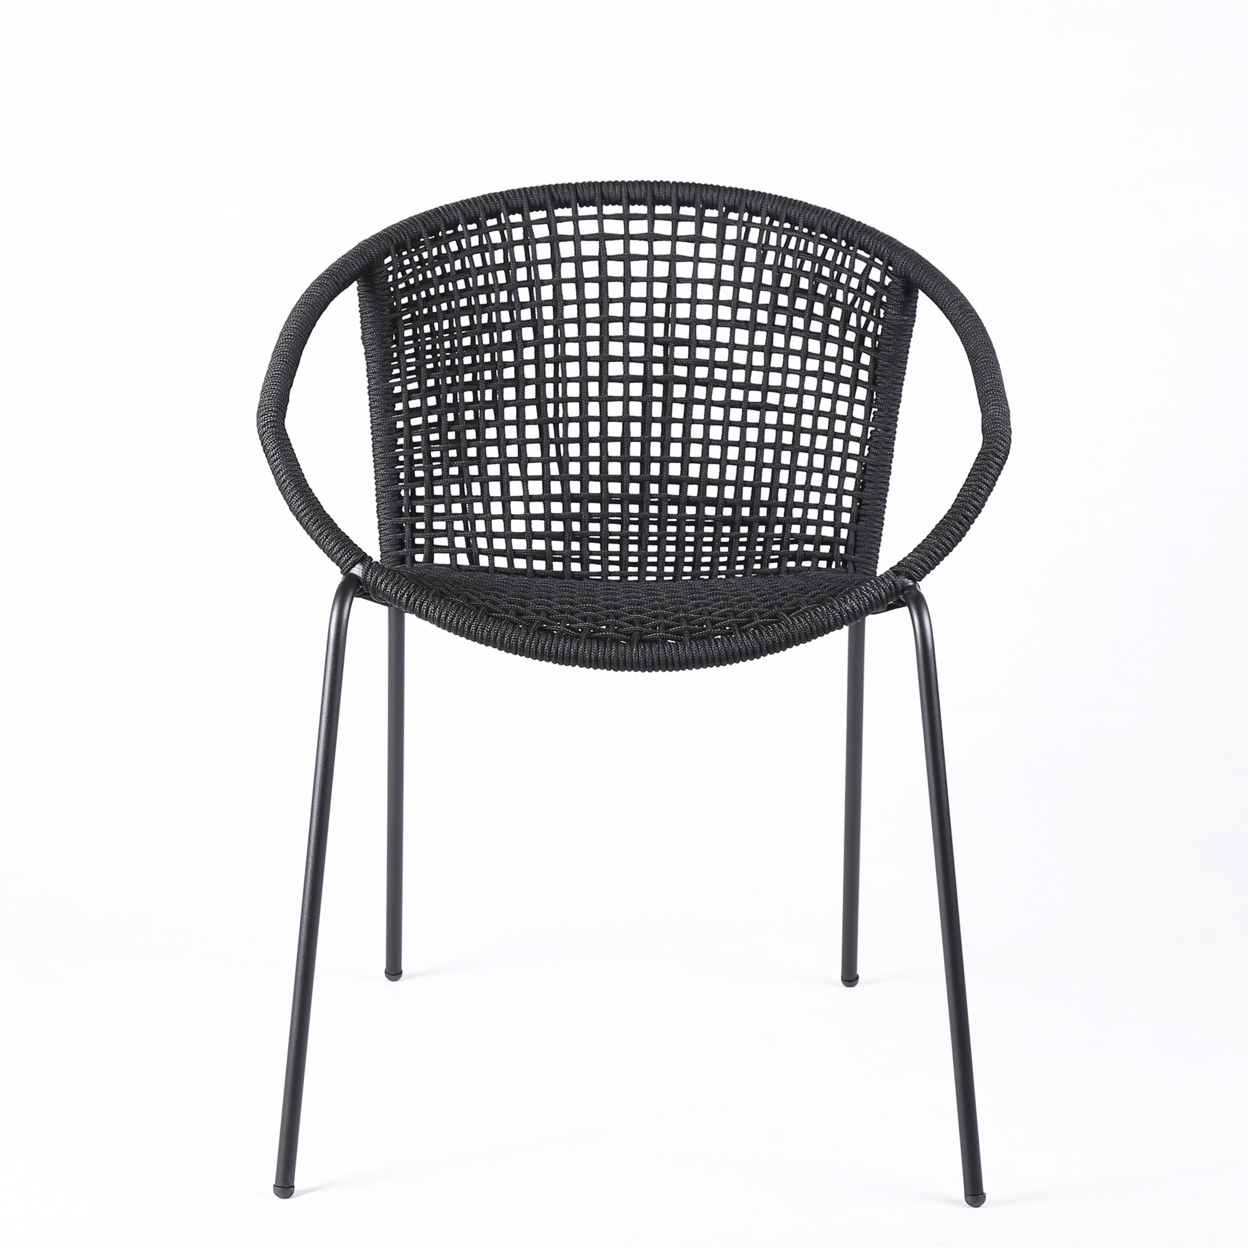 Dining Chair With Interwoven Geometric Seat And Back, Set Of 2, Black- Saltoro Sherpi